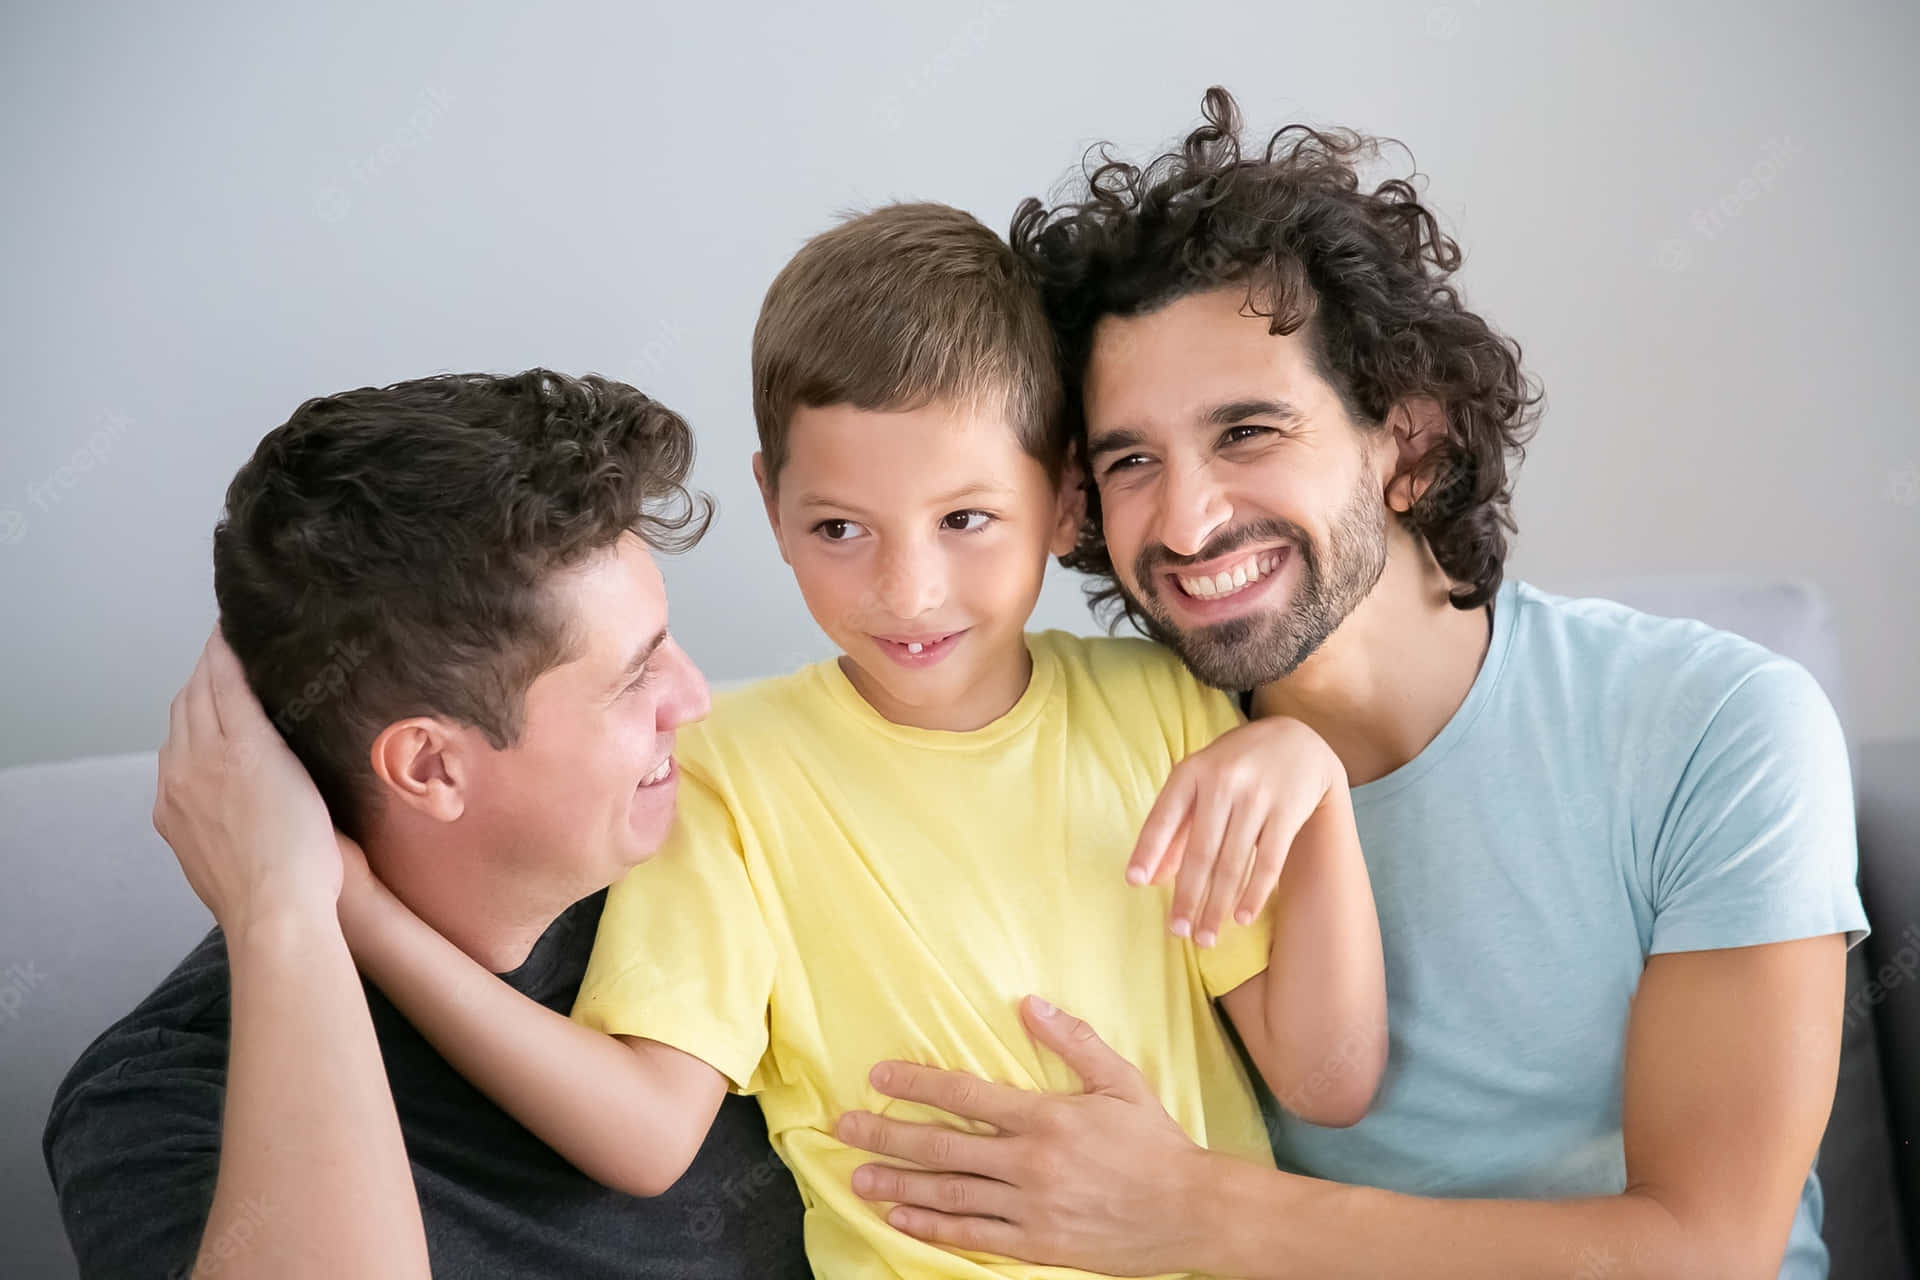 Smiling Gay Boys With A Kid Picture